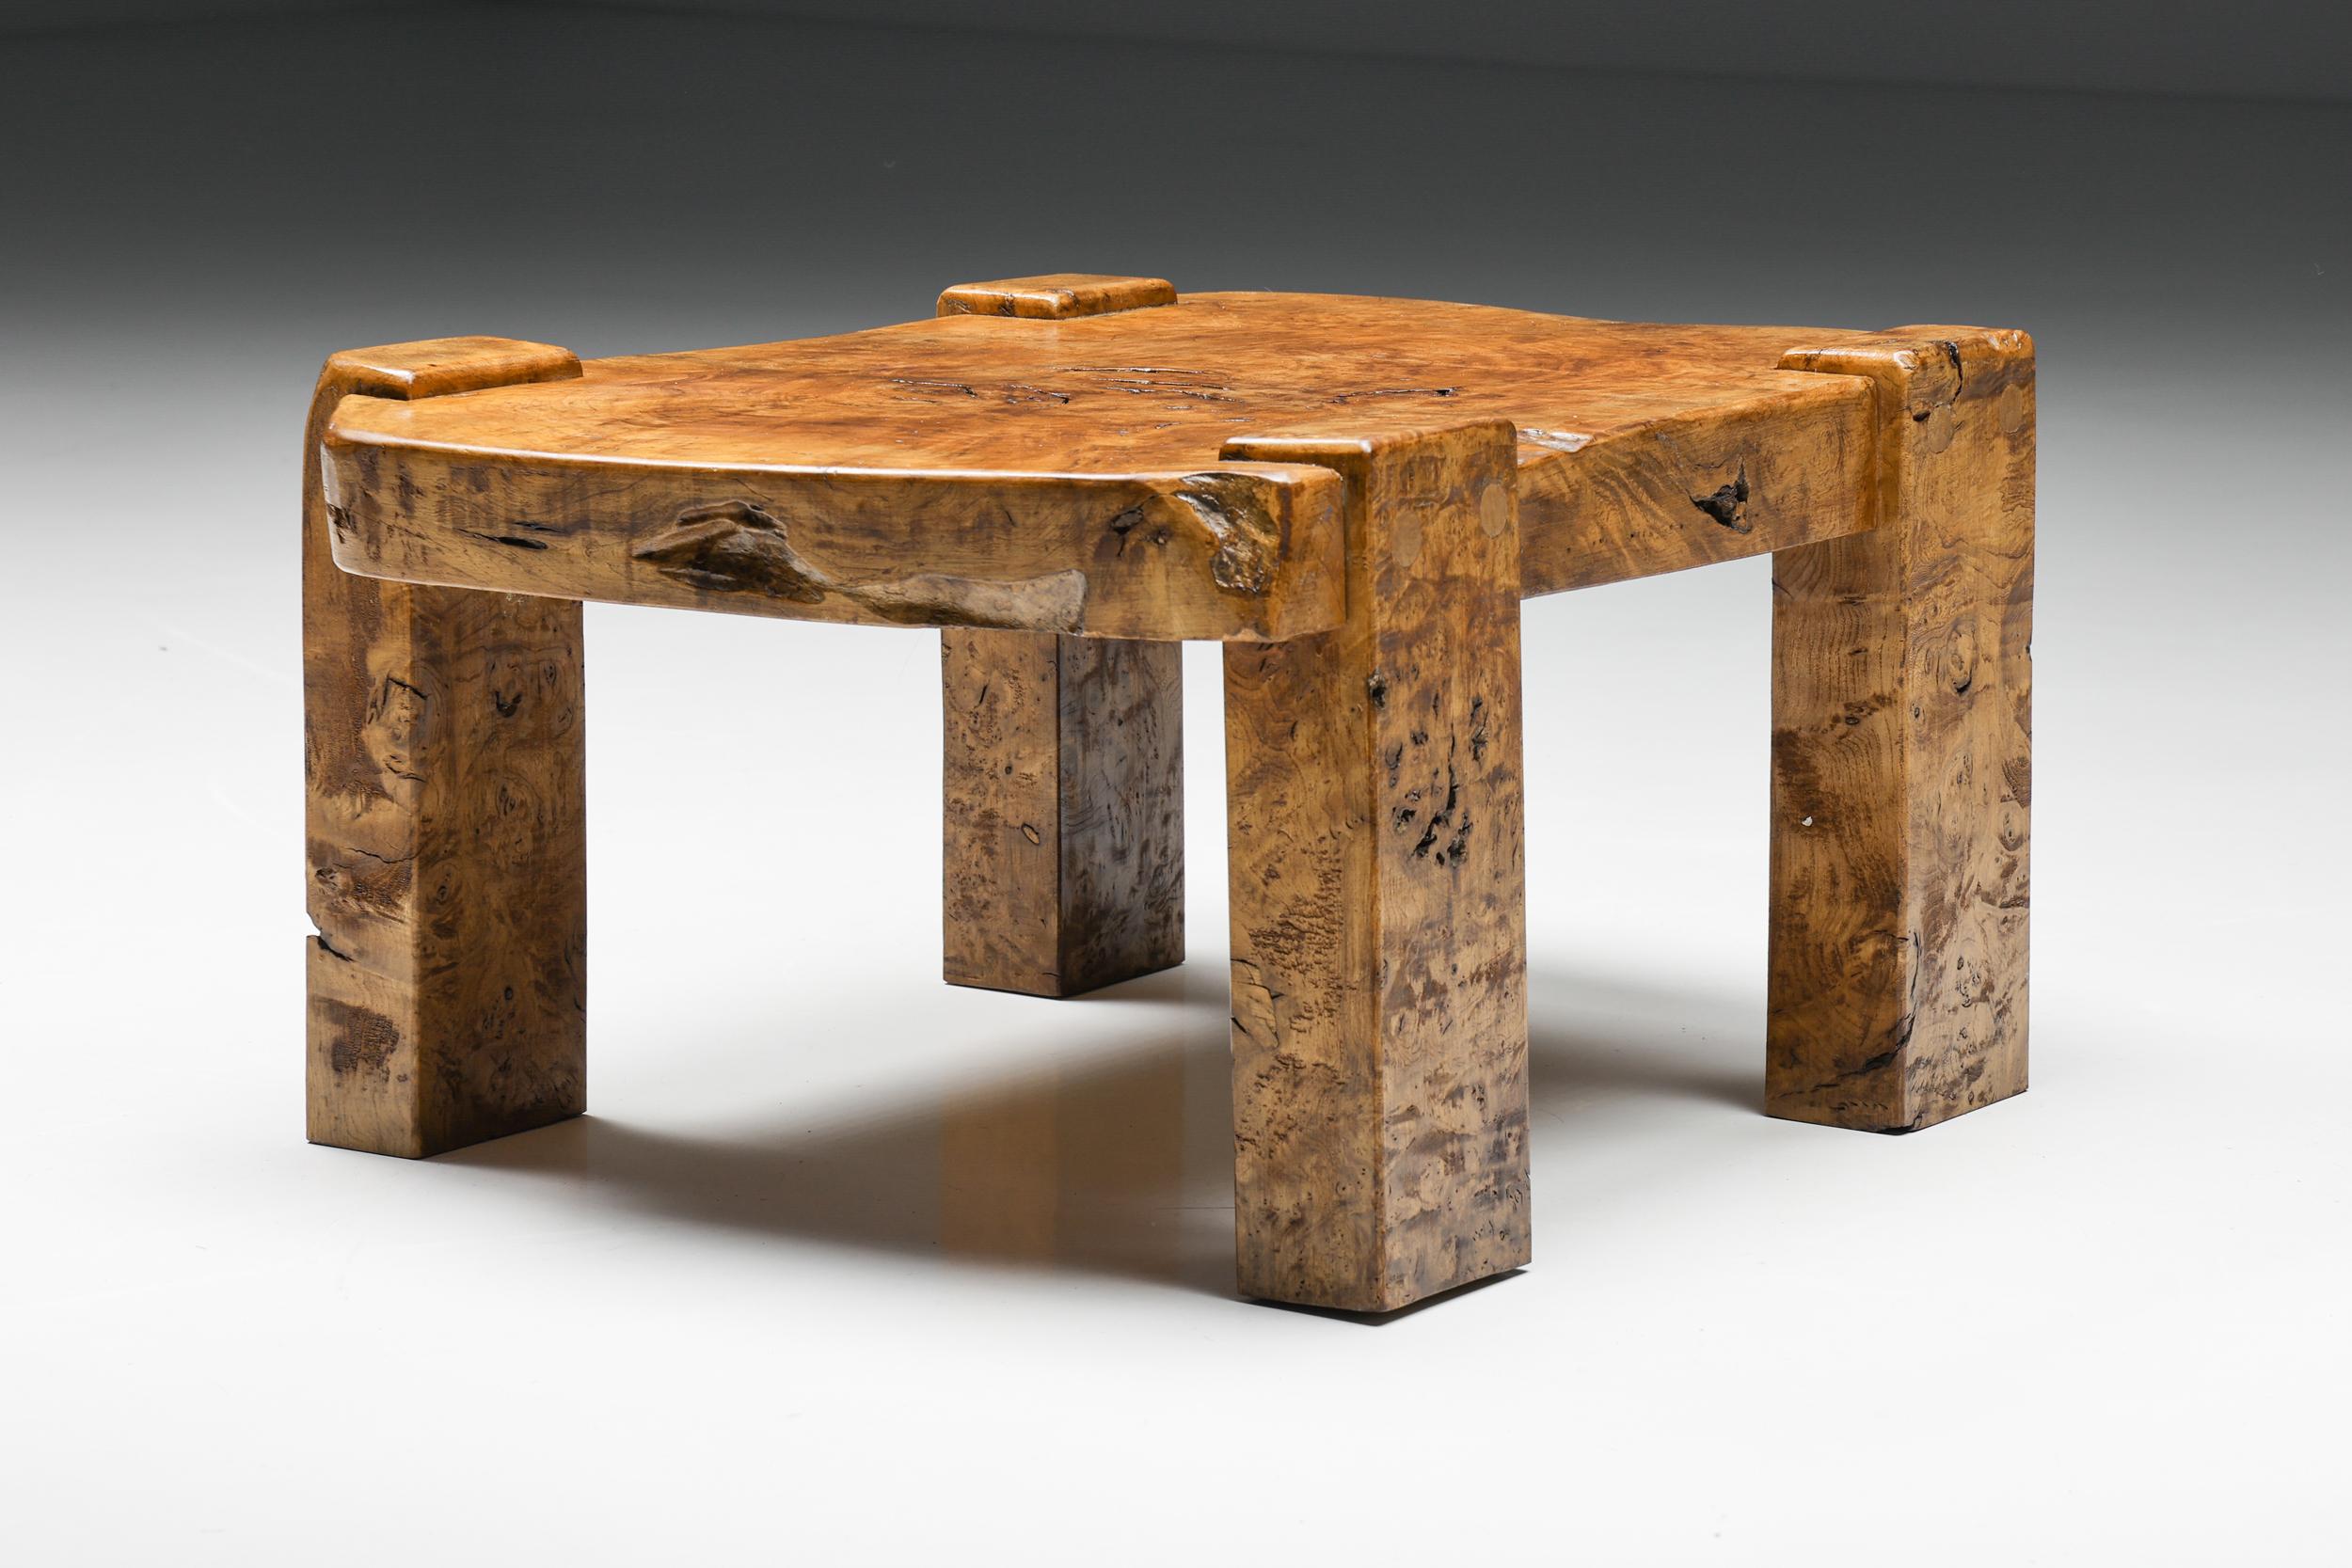 Burl wabi sabi rustic square coffee table, patina, side table, the Netherlands, 1930's;

Rustic square coffee table in burl wood. The remarkable patina and wood pattern in combination with the free crafted shape make this piece a one of a kind.